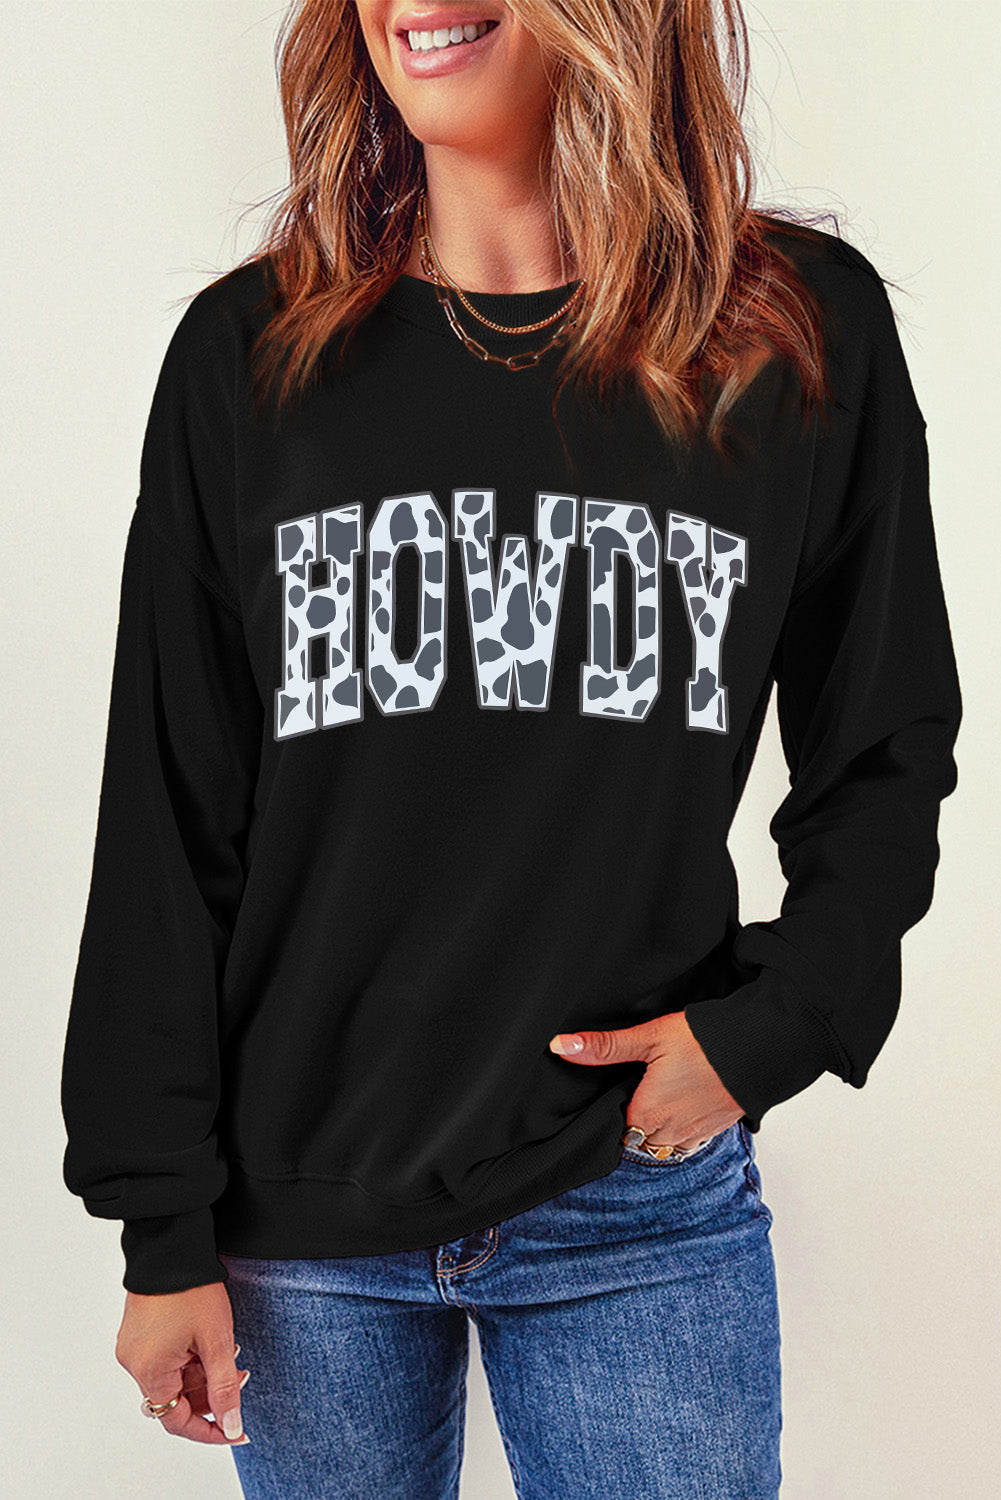 Round Neck Long Sleeve Howdy Graphic Sweatshirt - Kawaii Stop - Butterfly Lover, Casual Style, Durable Material, Enchanting Fashion, Fall Wardrobe, Graphic Sweatshirt, Hoodies, Long Sleeve, Machine Washable, Nature's Charm, Nature-Inspired Design, No Dry Cleaning, Opaque Fabric, Outdoor Beauty, Relaxed Fit, Round Neck, Ship From Overseas, Sweatshirts, SYNZ, Versatile, Whimsical Artwork, Women's Clothing, Women's Fashion